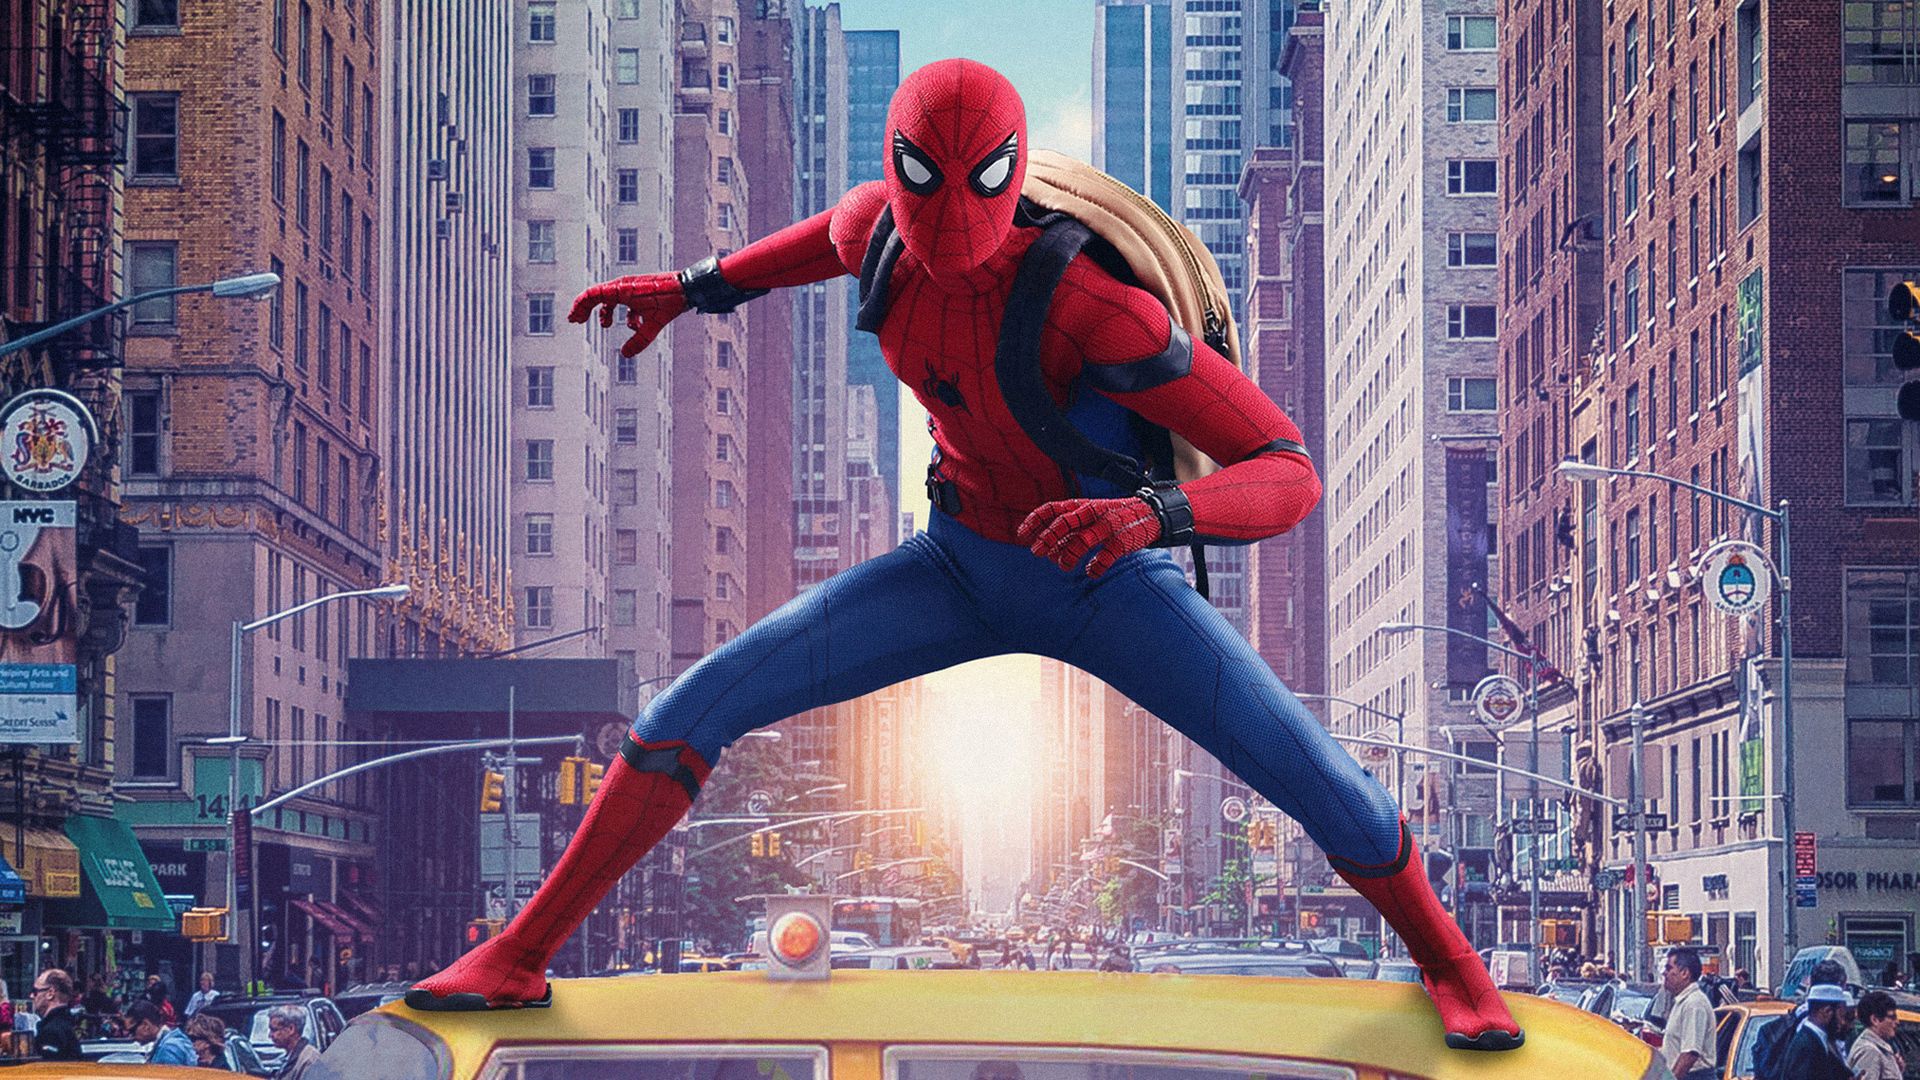 SAM RAIMI IS STILL THINKING ABOUT HIS UNMADE SPIDER MAN 4. Sony, Marvel Cine. Spiderman Homecoming Movie, Spiderman Homecoming, Spiderman Homecoming Movie Poster